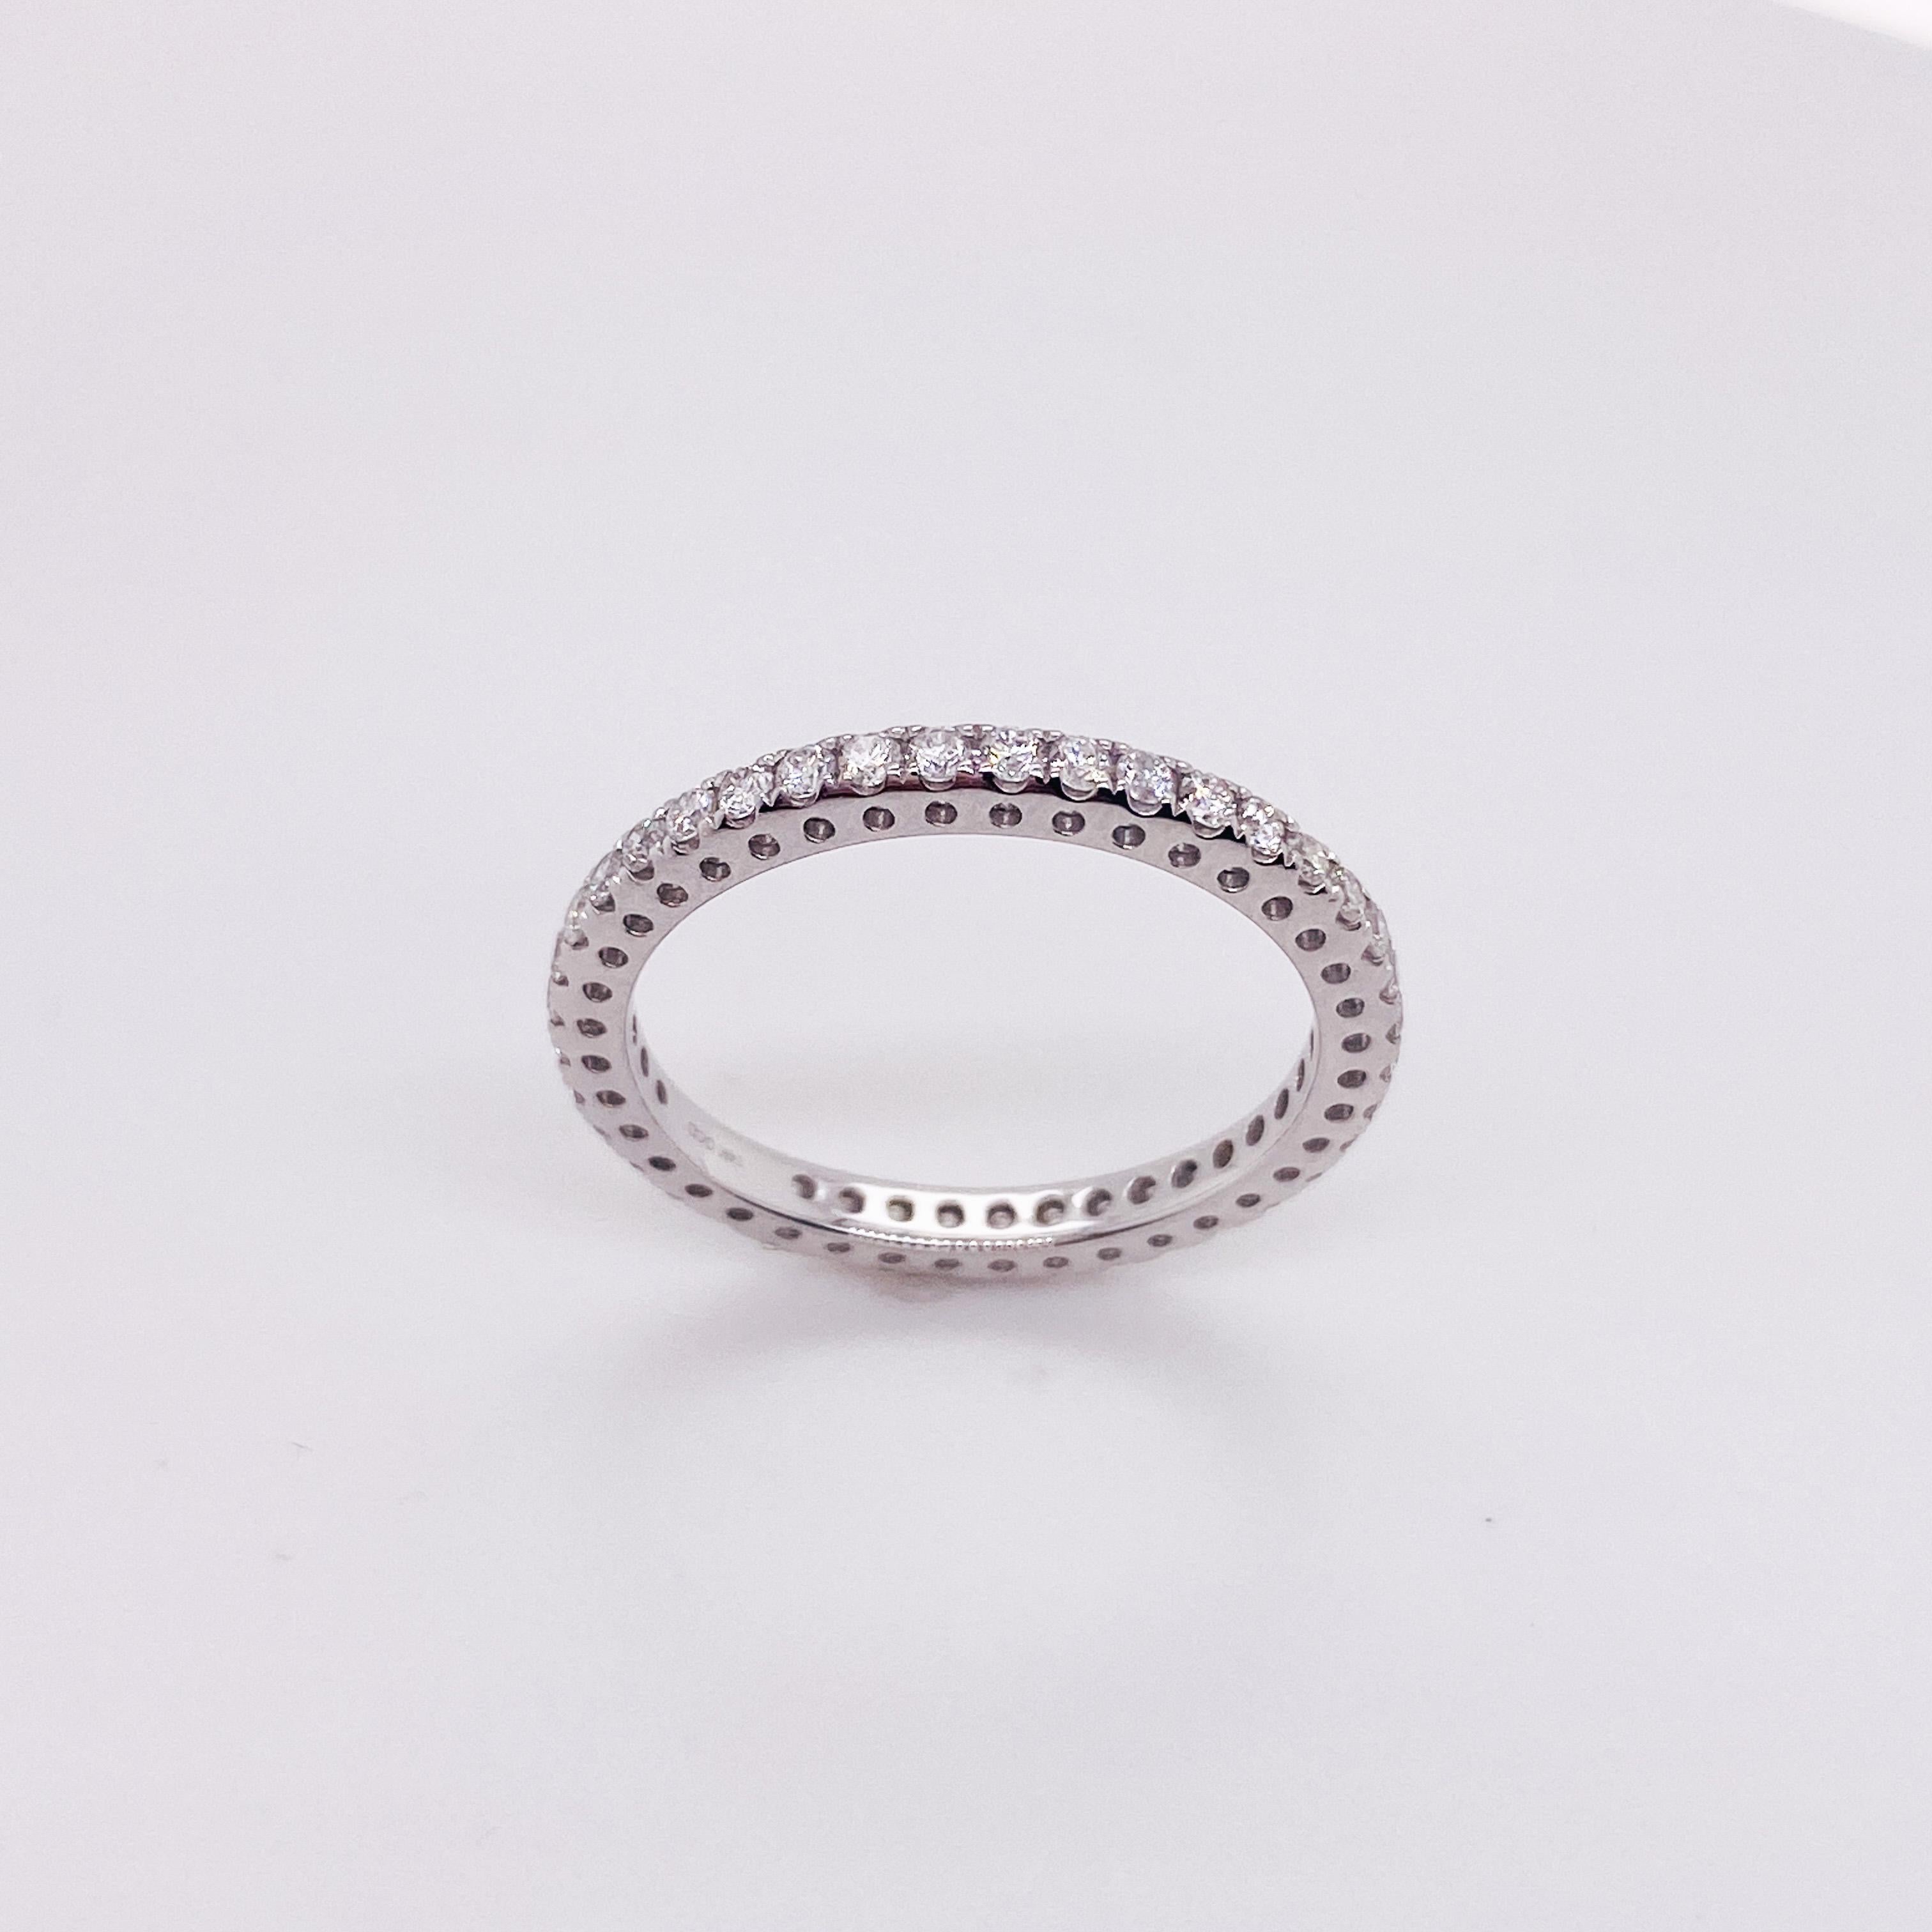 For Sale:  Diamond Eternity Band in 14k White Gold .54cttw Half Carat Stackable Ring 2